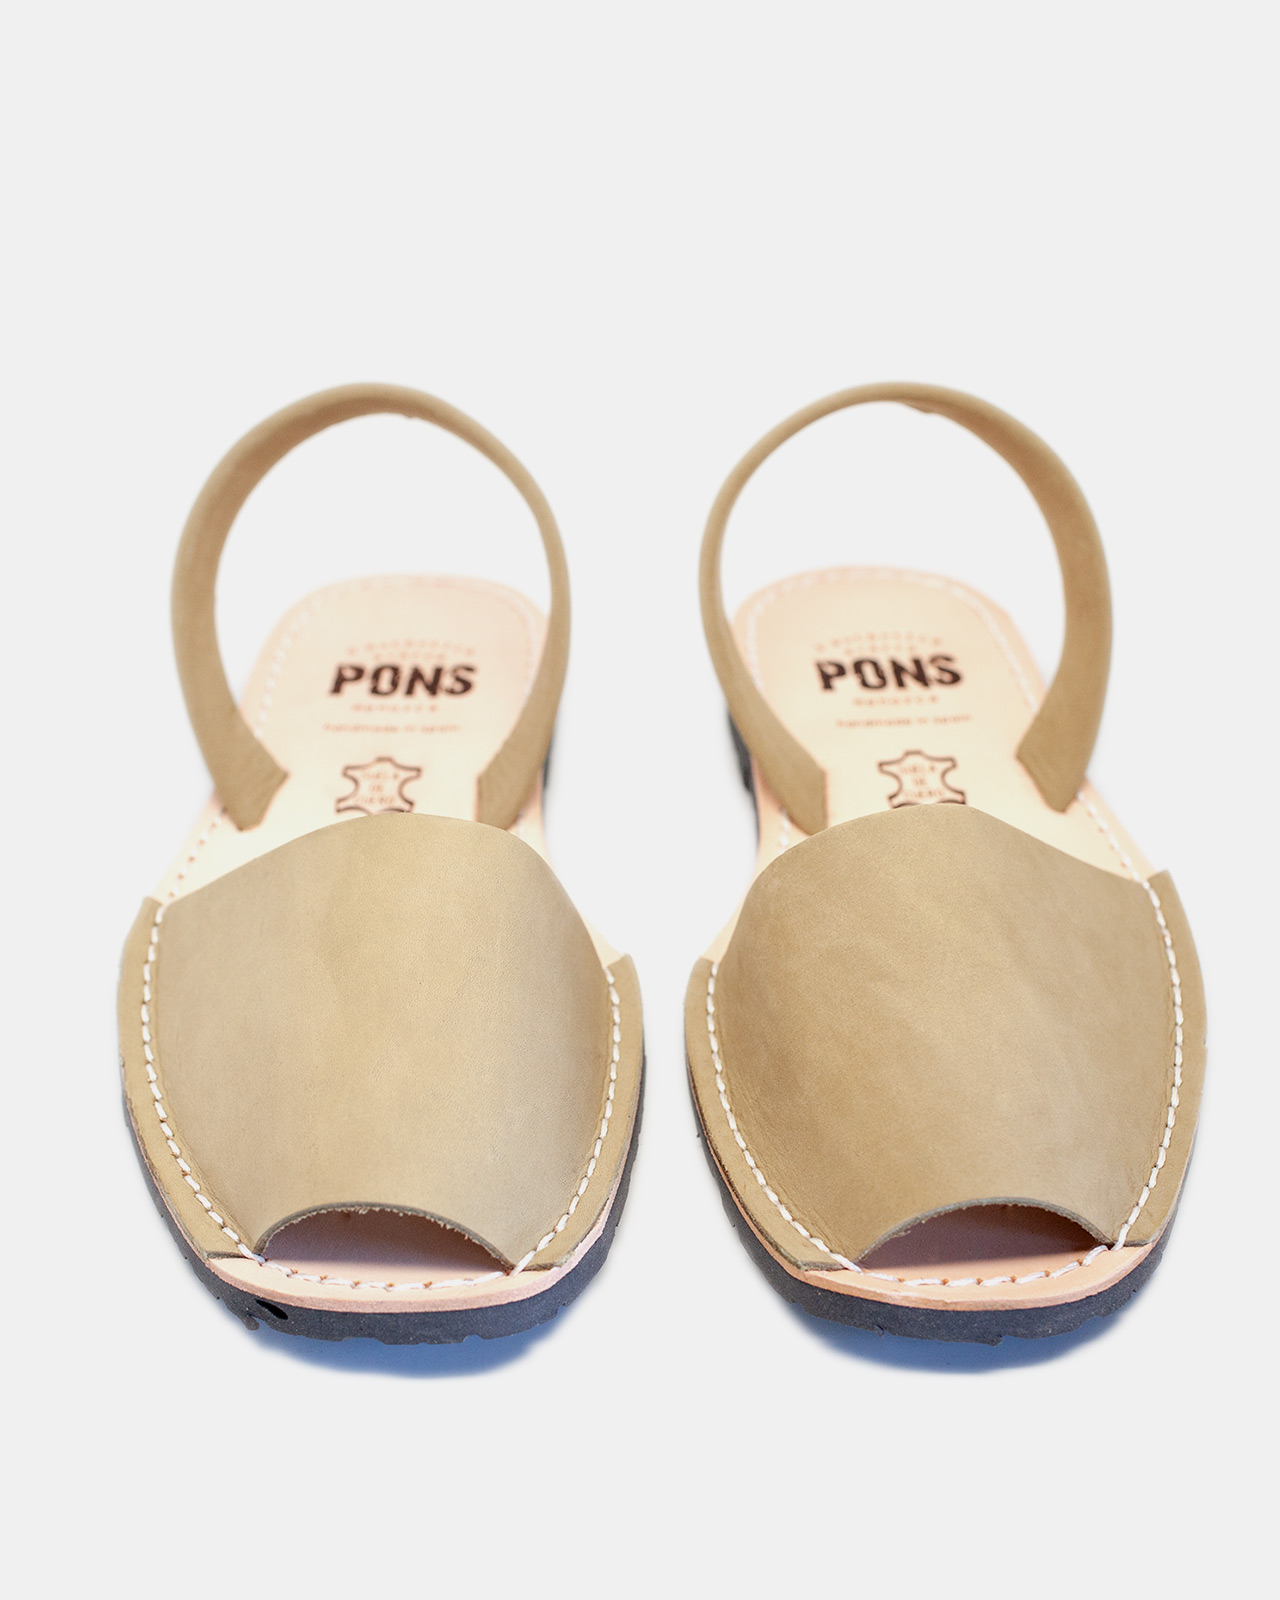 Pons Classic Style Sand Avarca Sandals in Natural Leather for Women ...